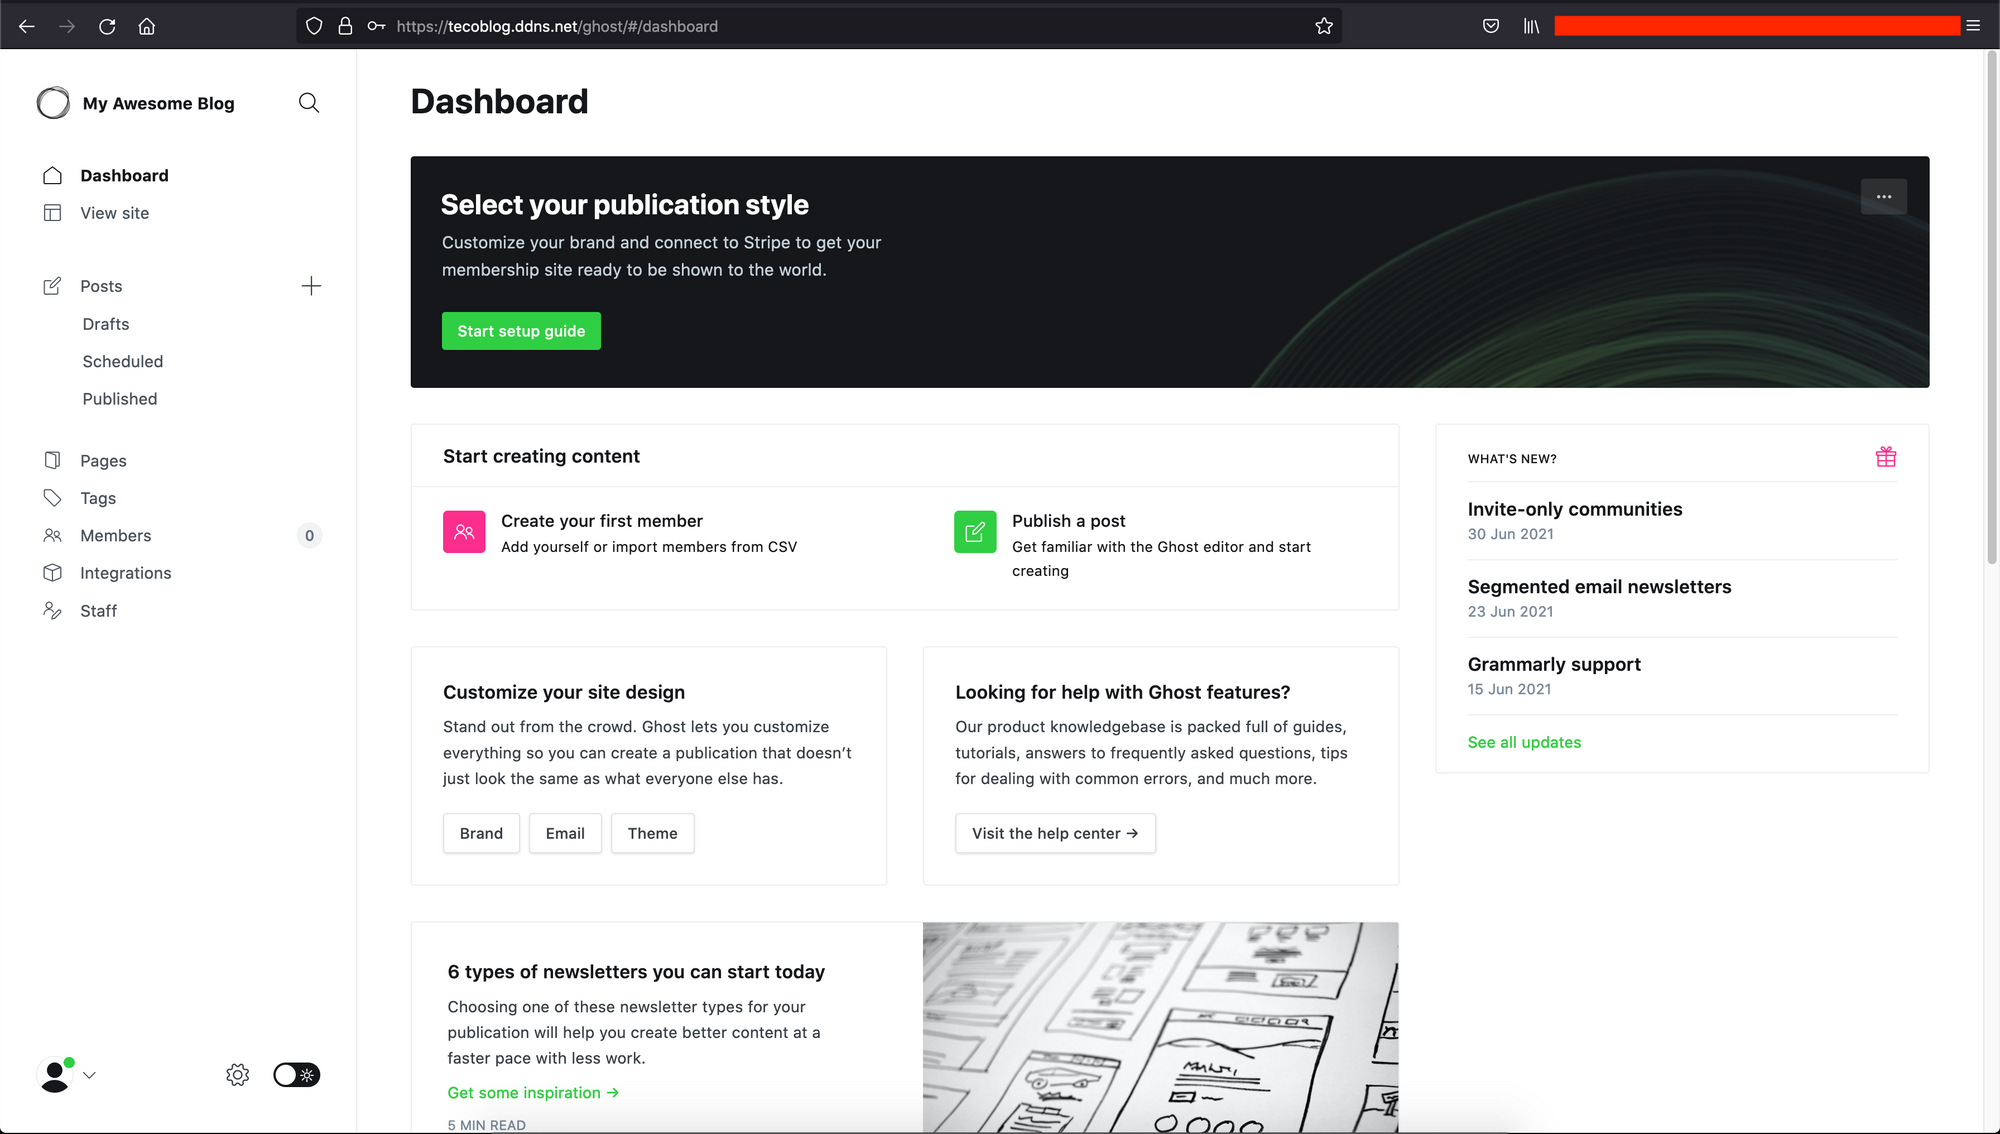 Ghost administration dashboard page.